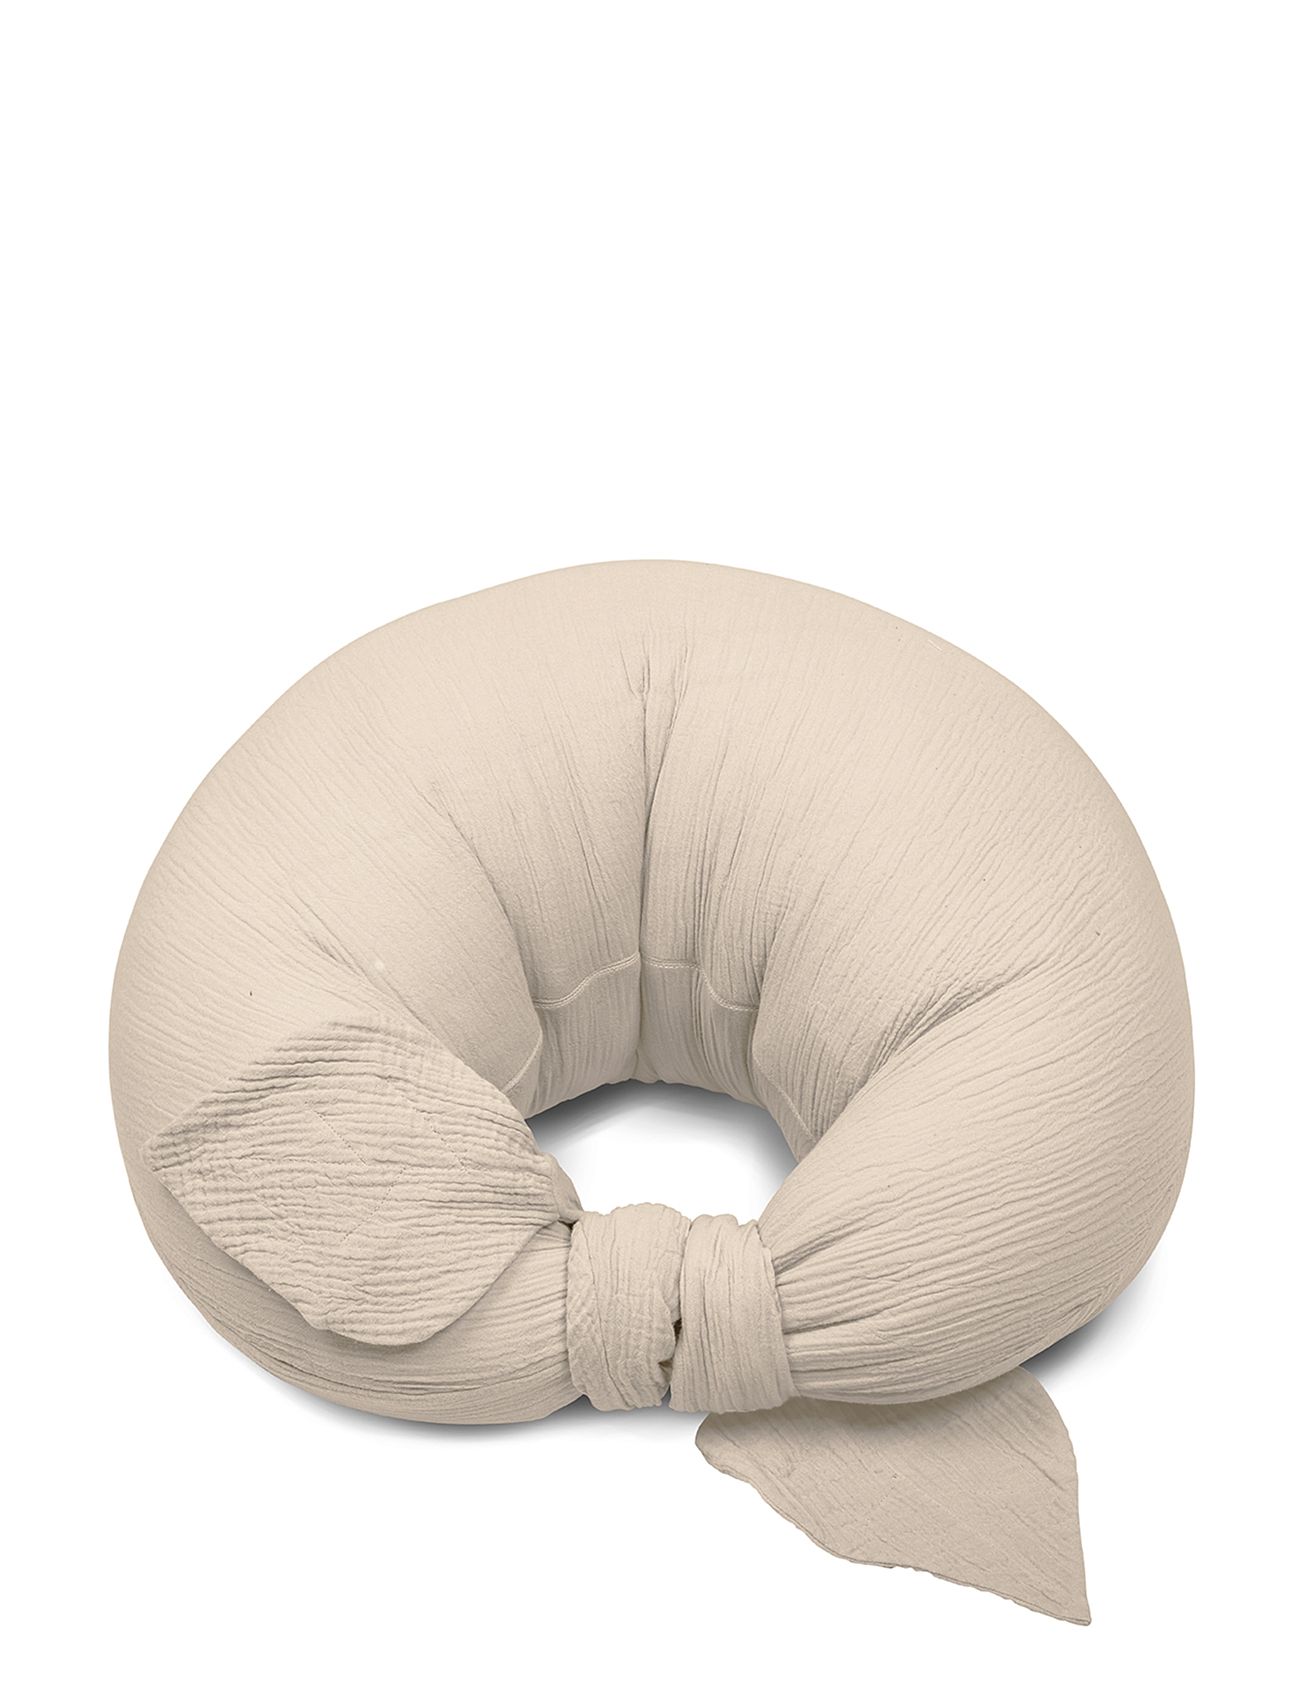 Nursing Pillow Feather Grey Baby & Maternity Breastfeeding Products Nursing Pillows Cream That's Mine